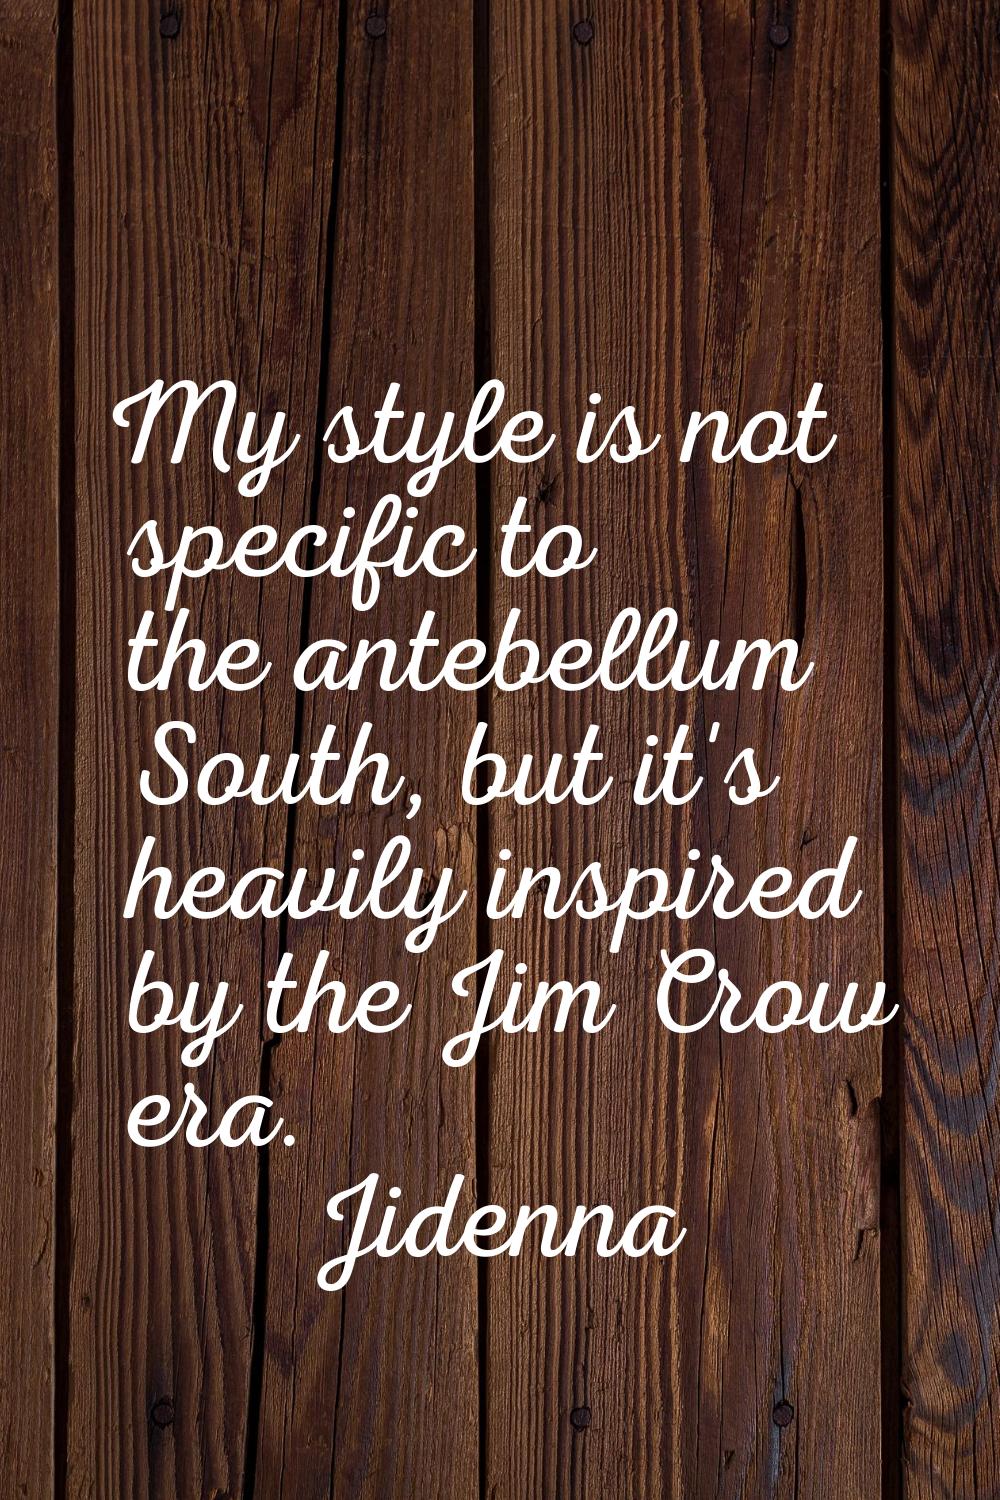 My style is not specific to the antebellum South, but it's heavily inspired by the Jim Crow era.